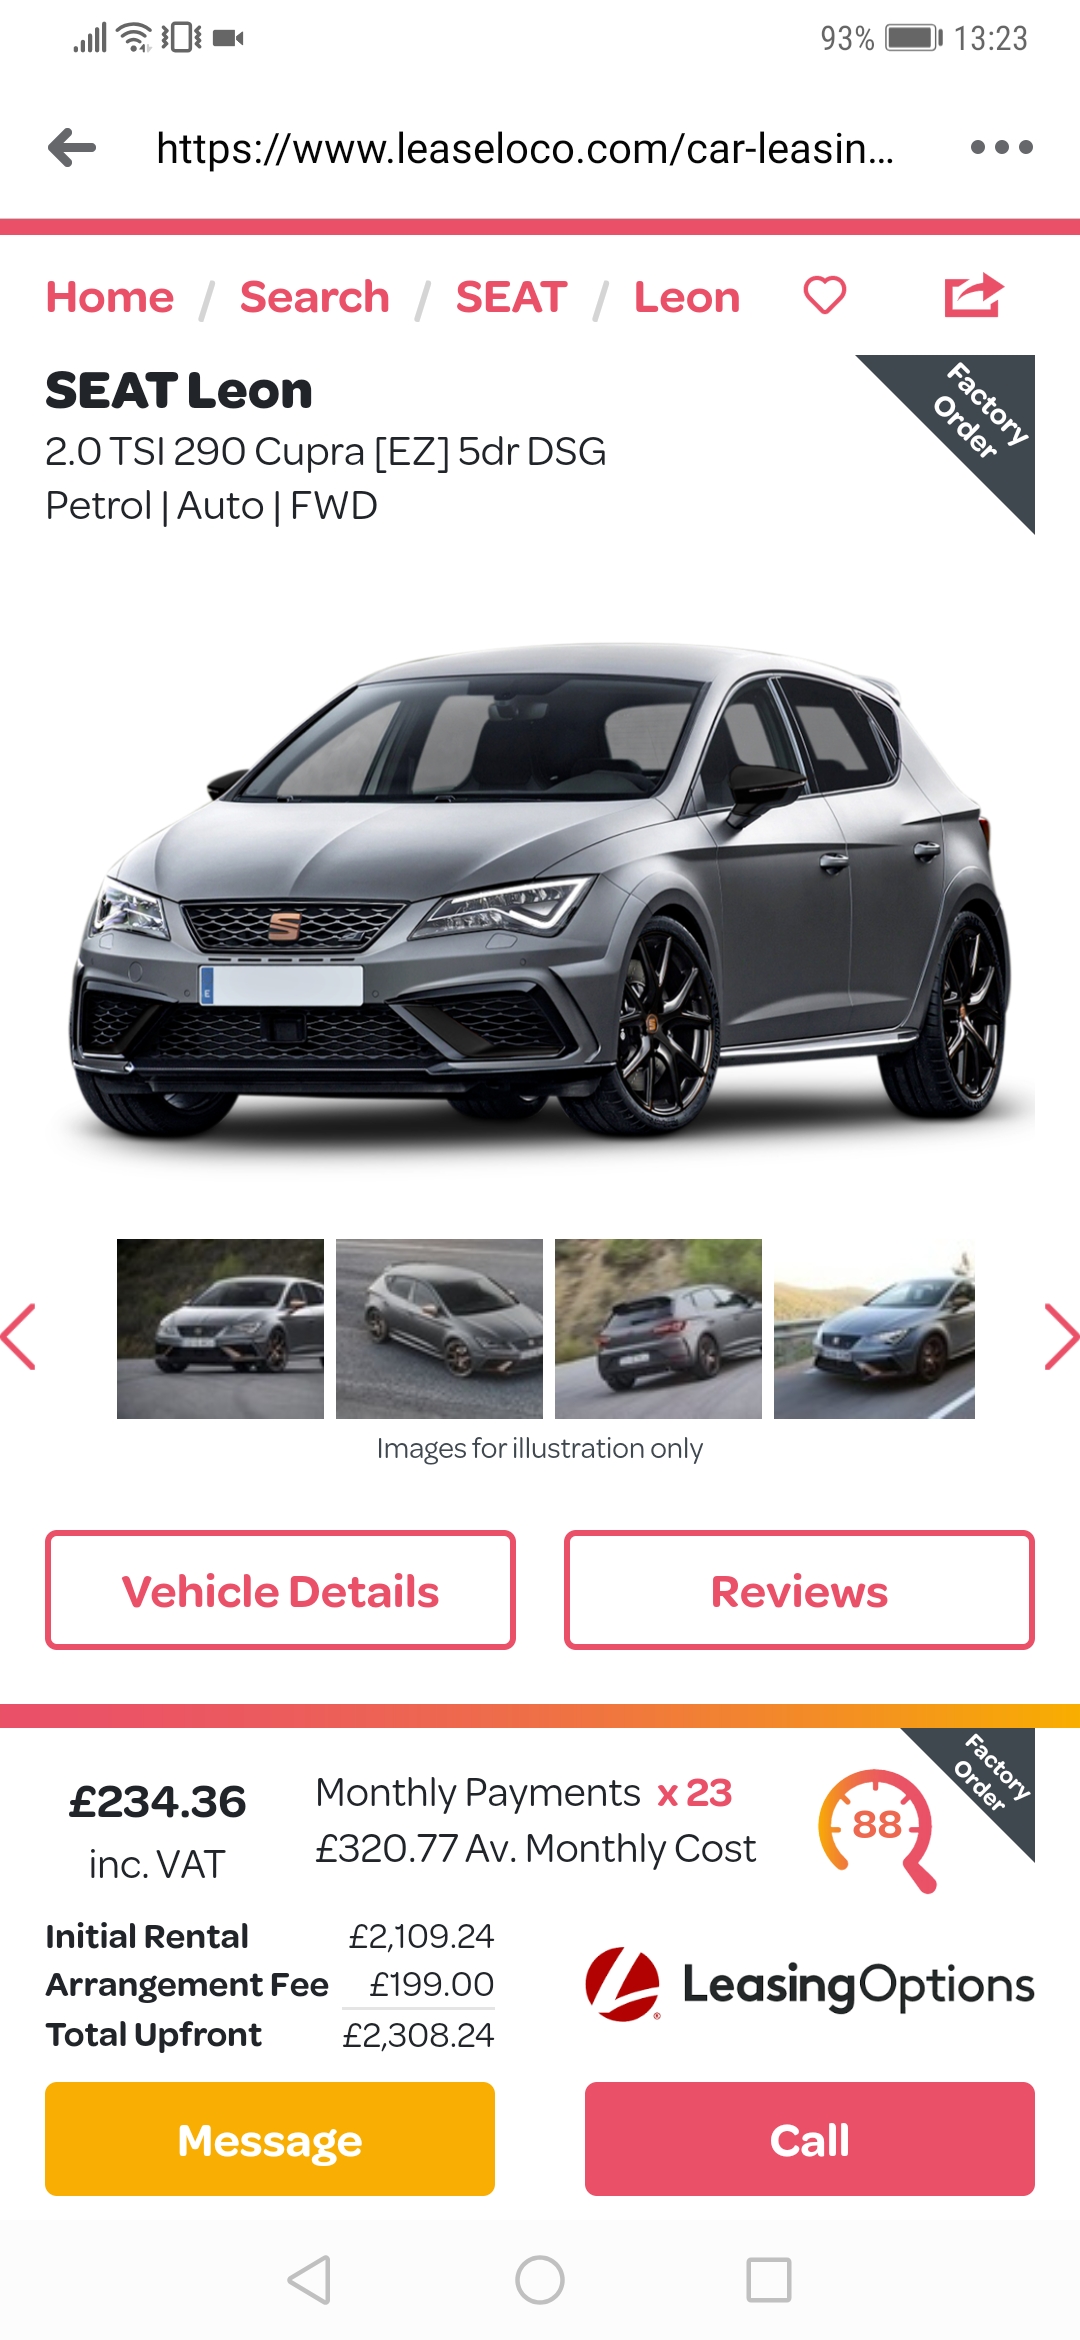 Best Lease Car Deals Available? (Vol 8) - Page 378 - Car Buying - PistonHeads